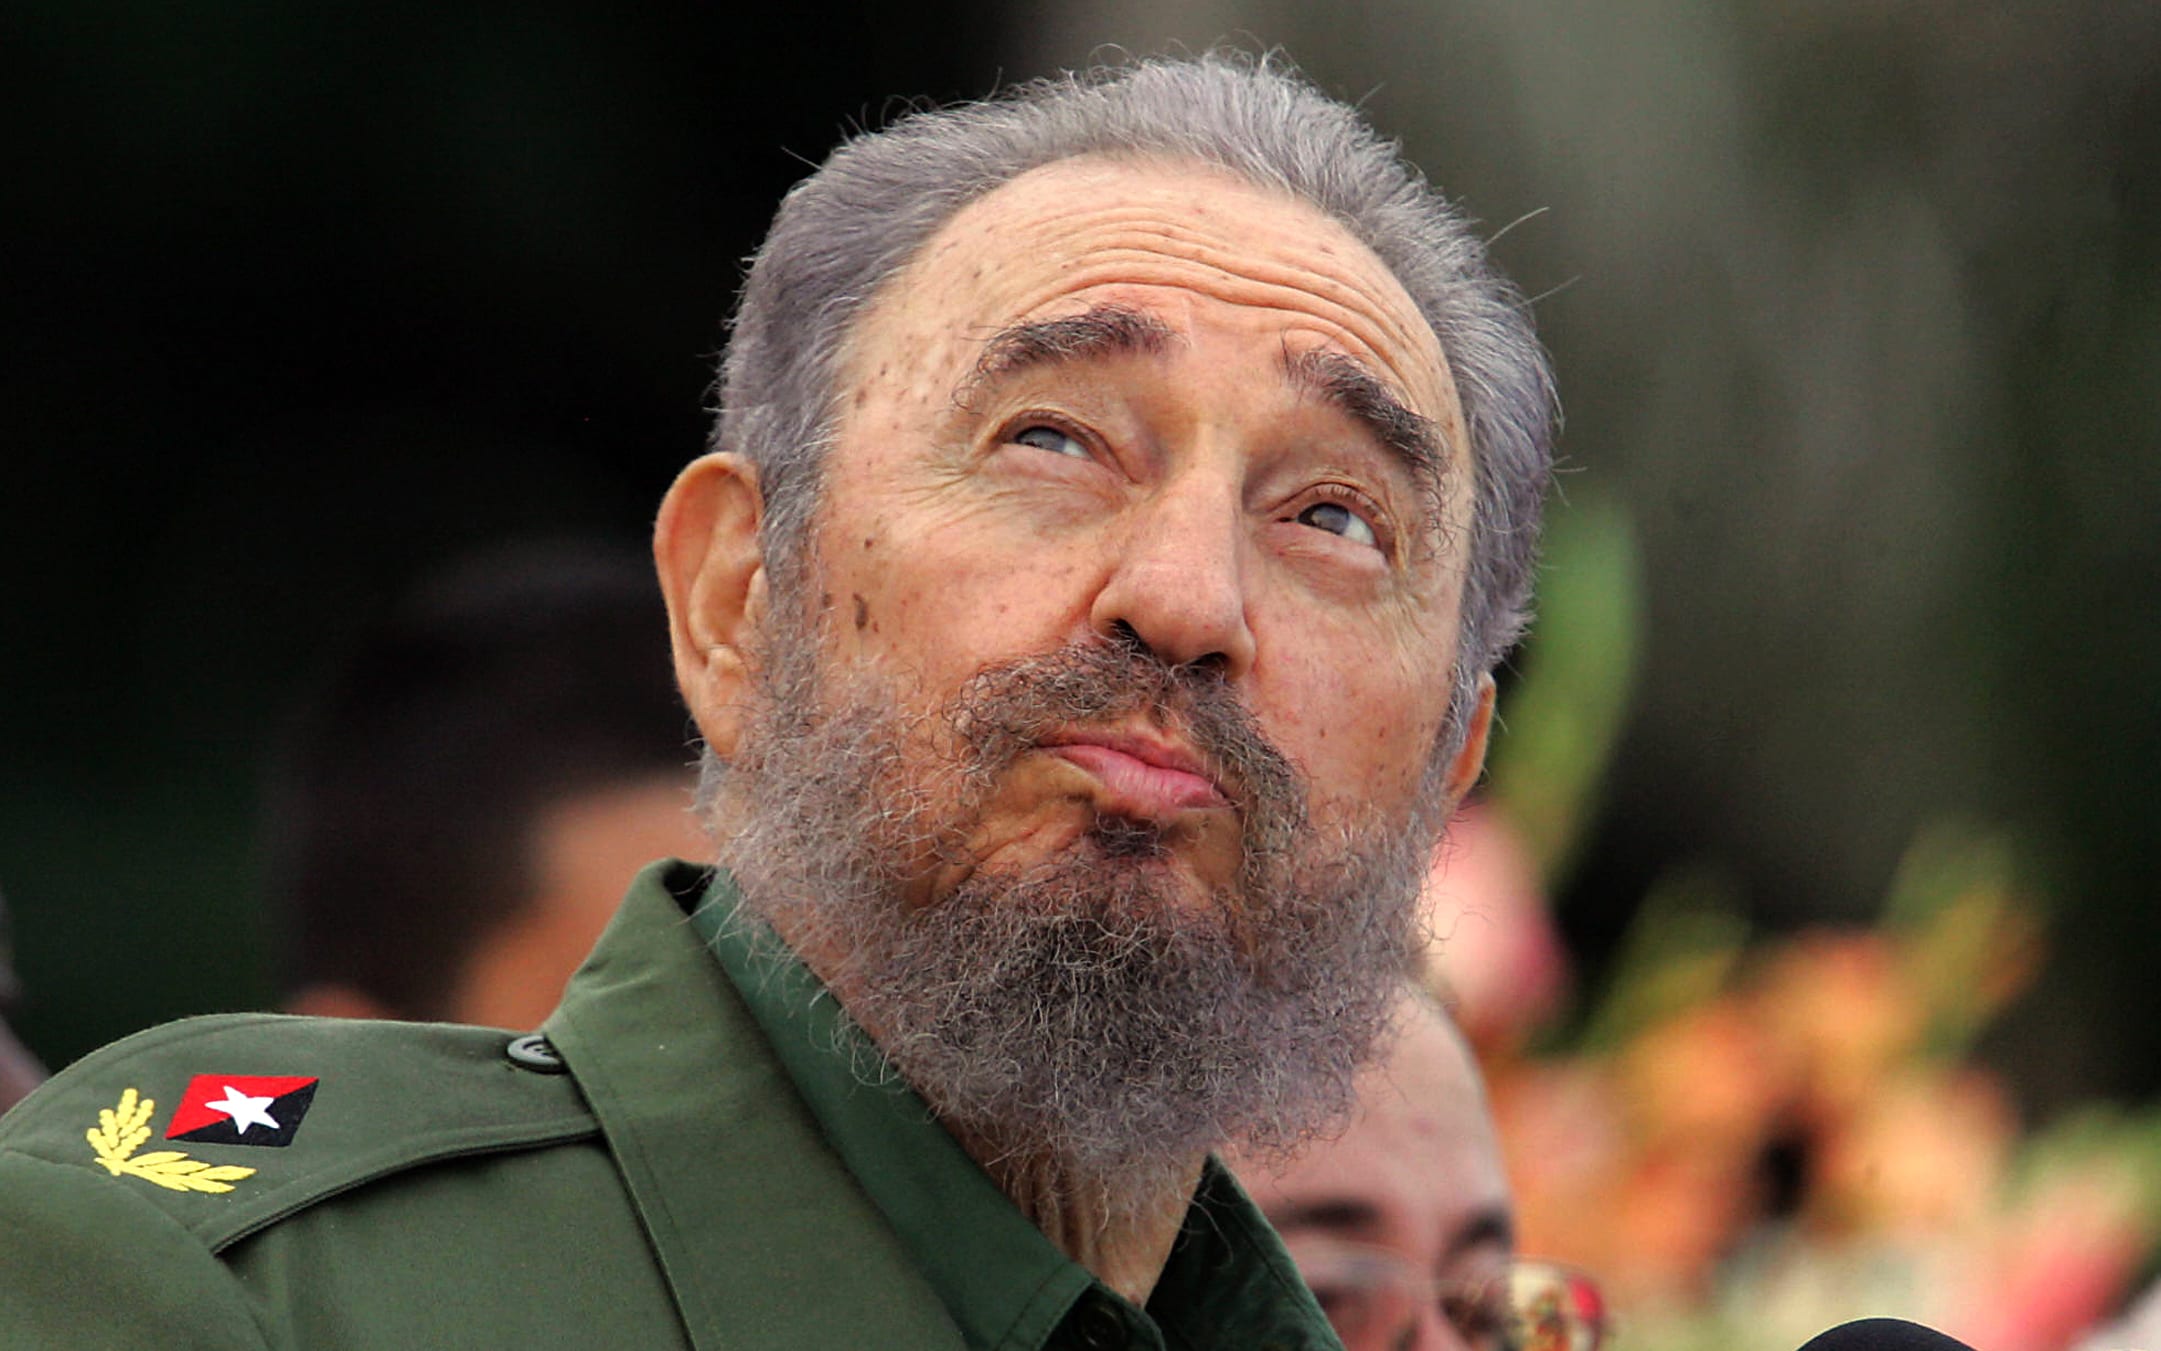 Cuban revolutionary icon Fidel Castro died late on November 25, 2016 in Havana, his brother, President Raul Castro, announced on national television.